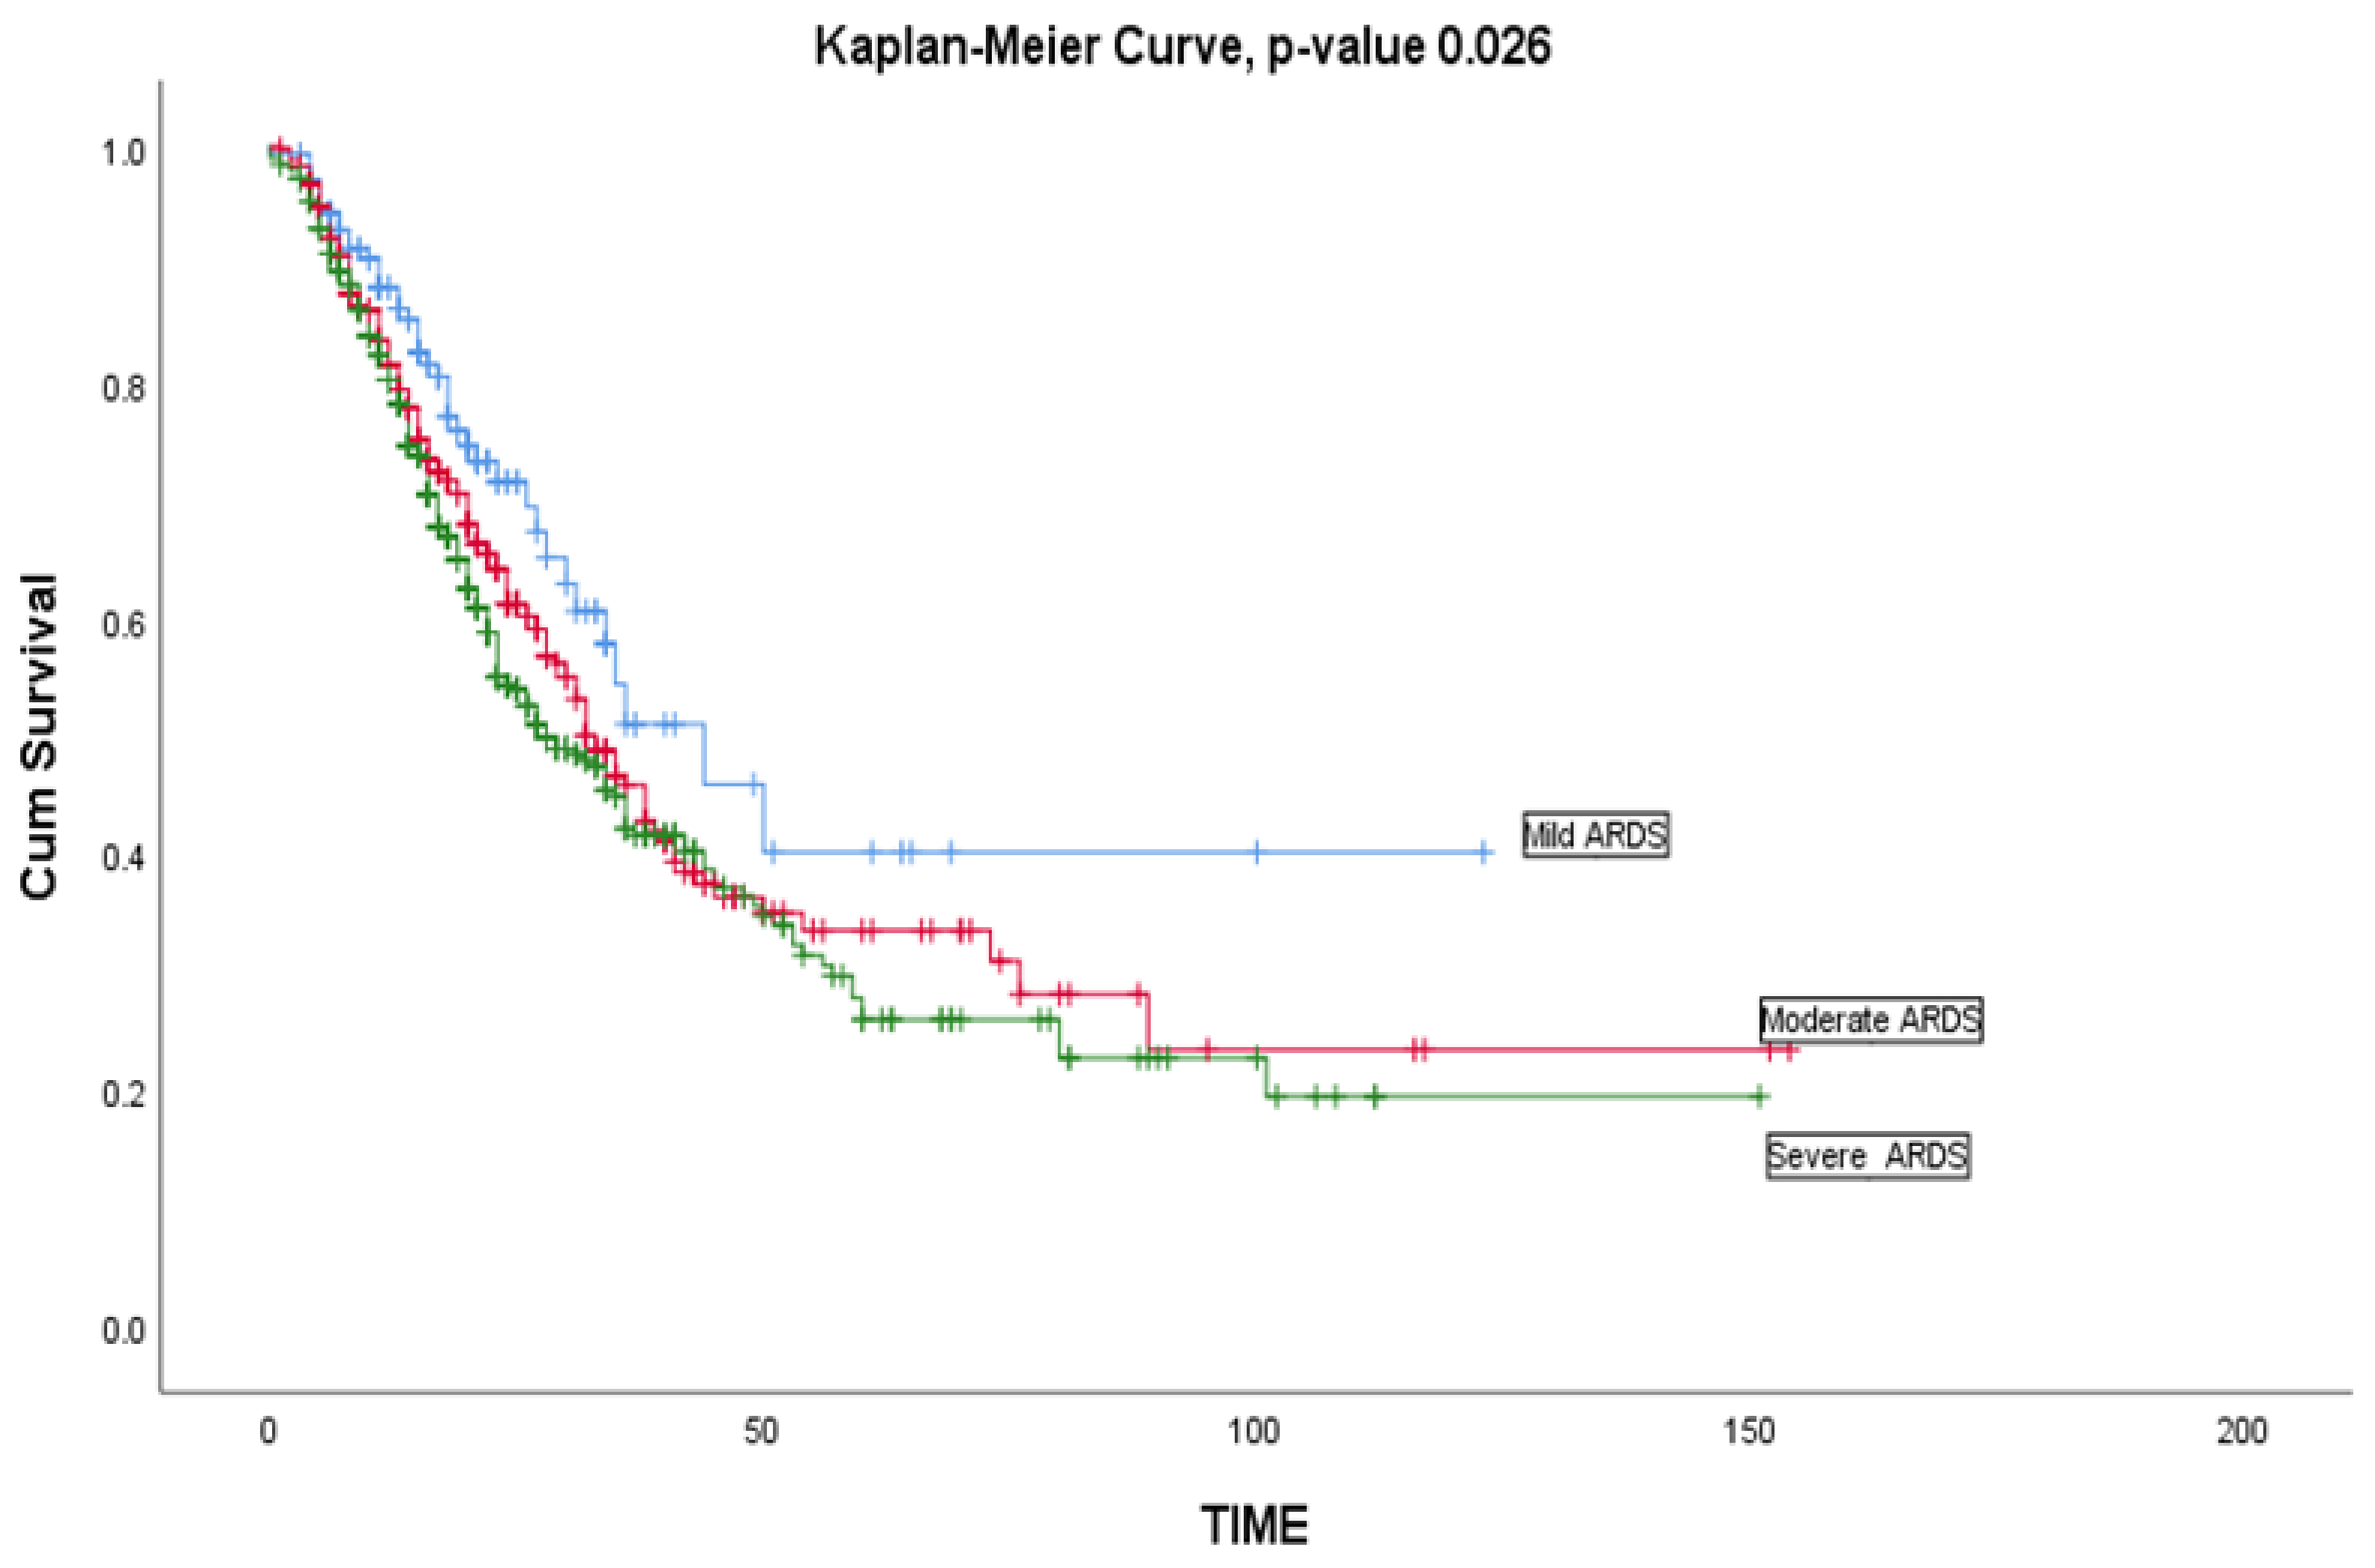 Kaplan-Meier analysis of clinical outcomes in critical COVID-19